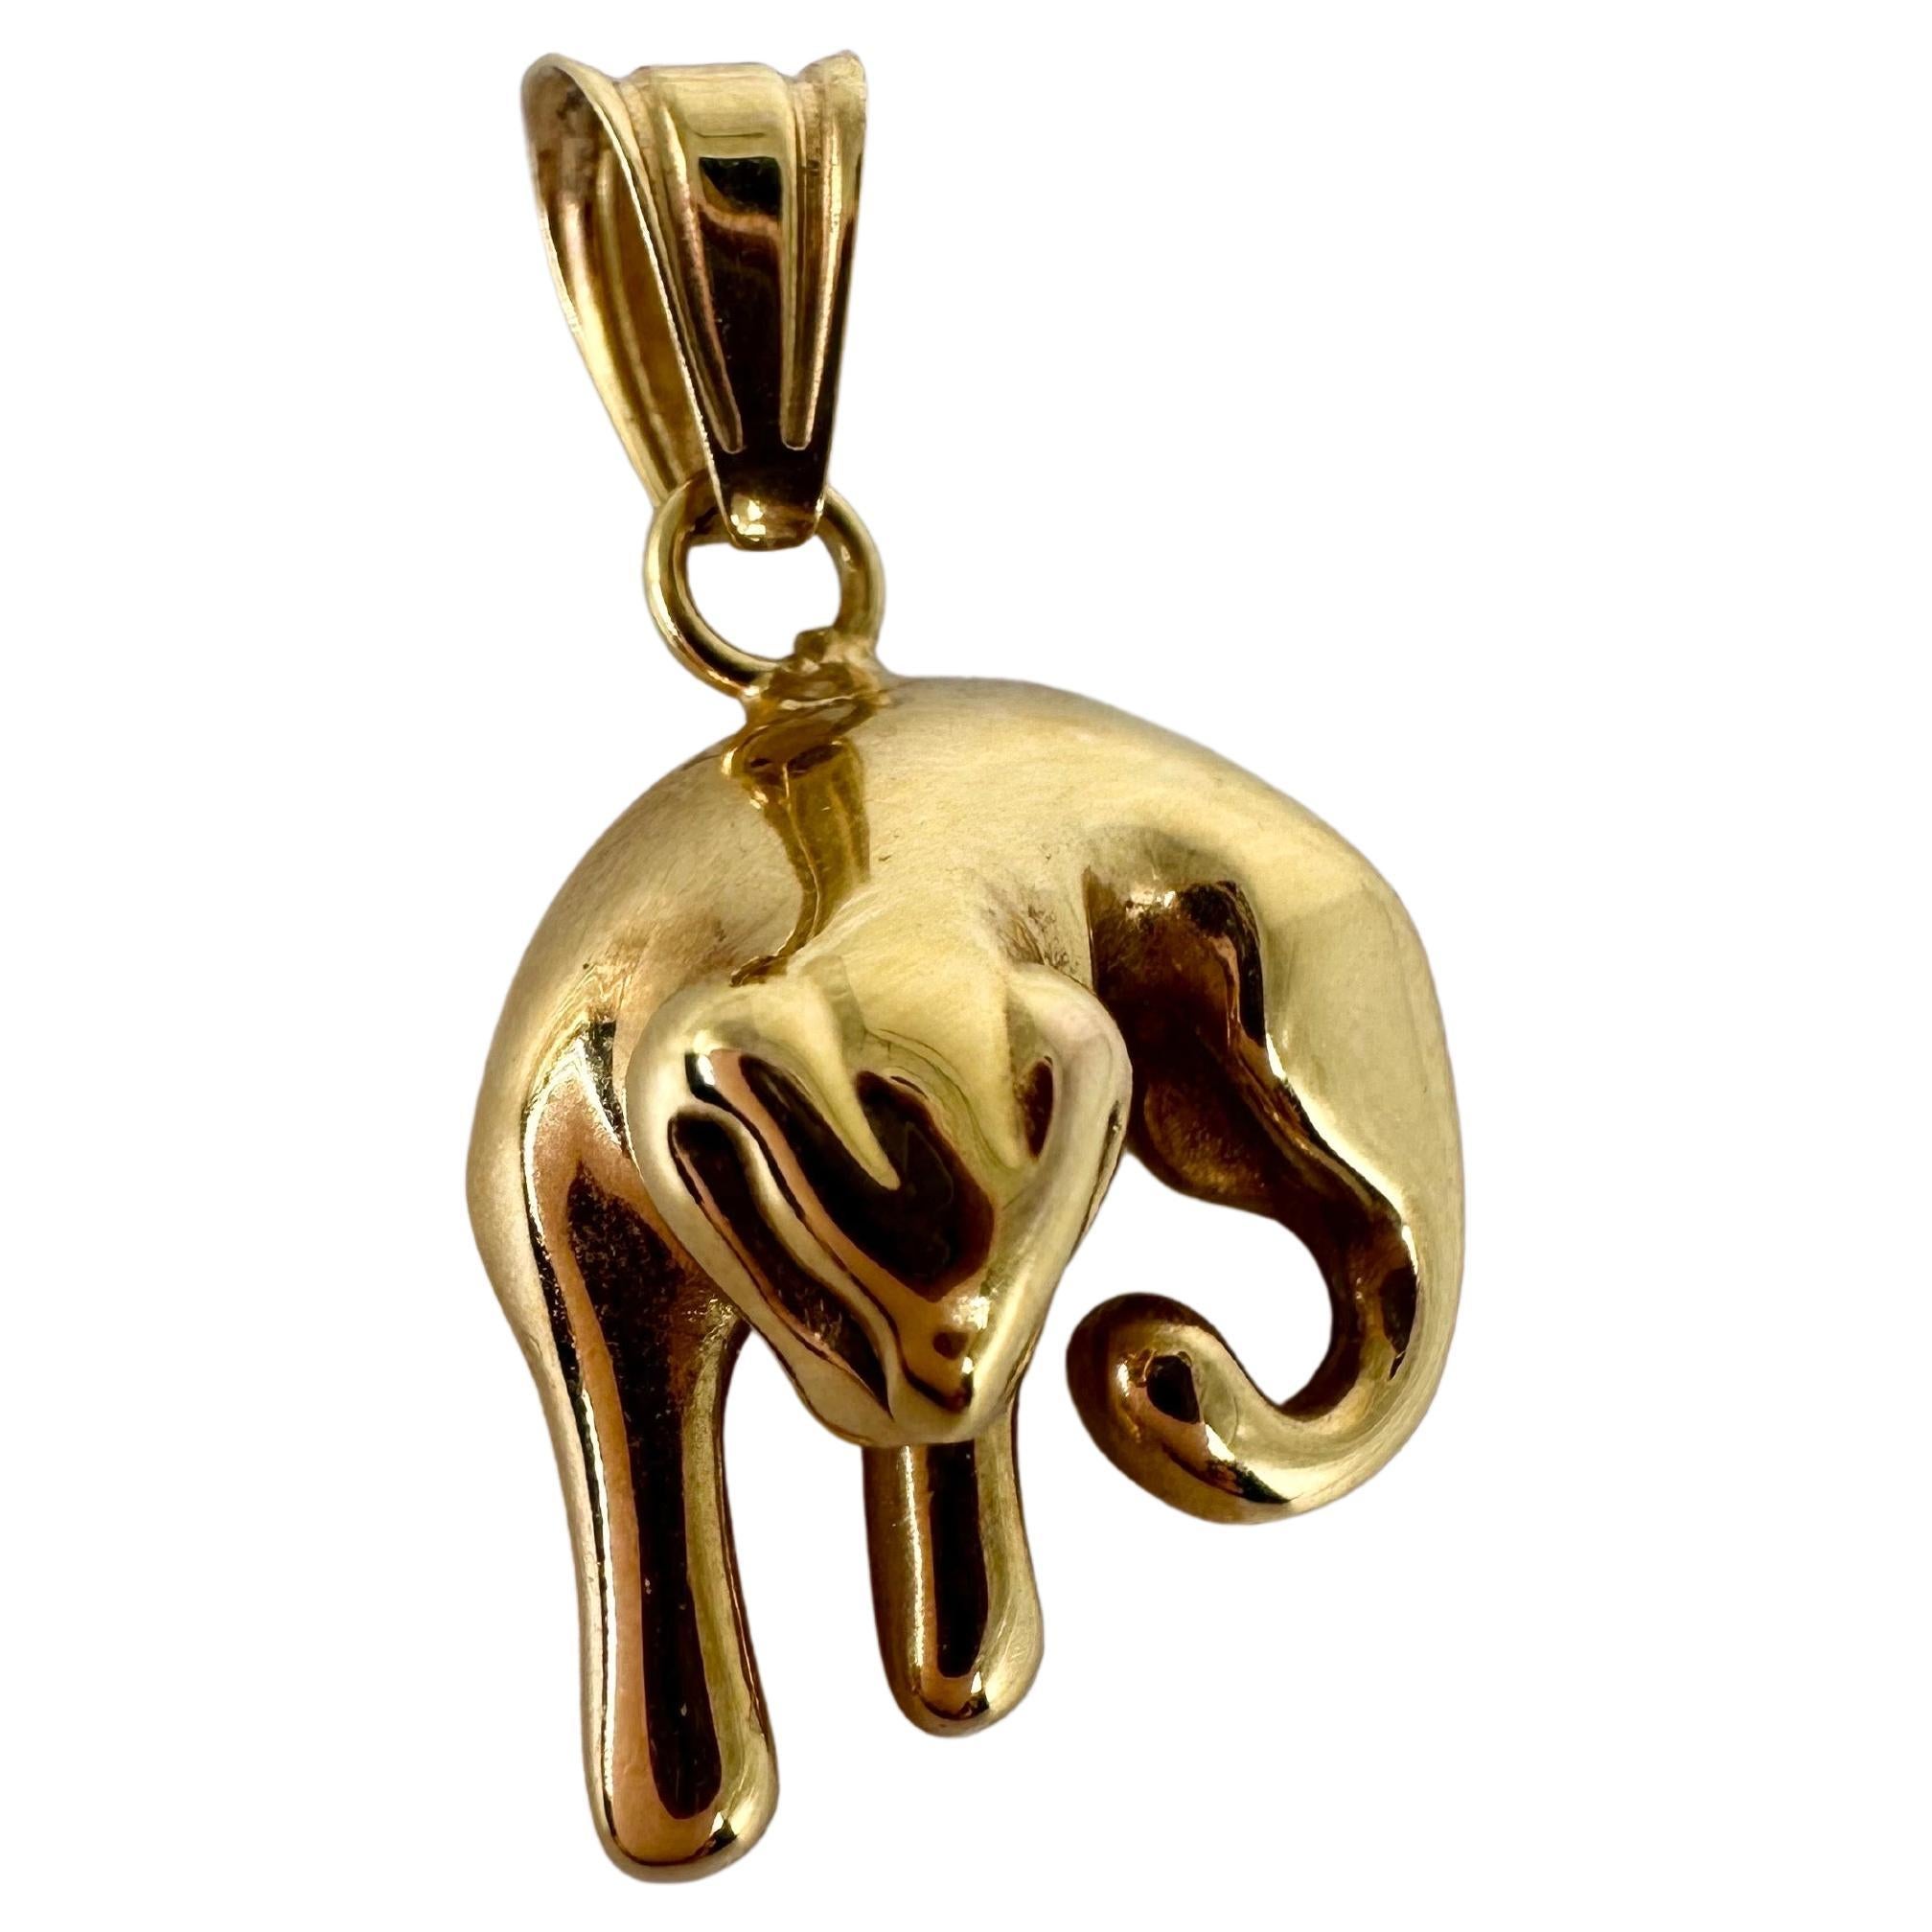 Gold panther pendant necklace 14KT gold with 18" chain For Sale